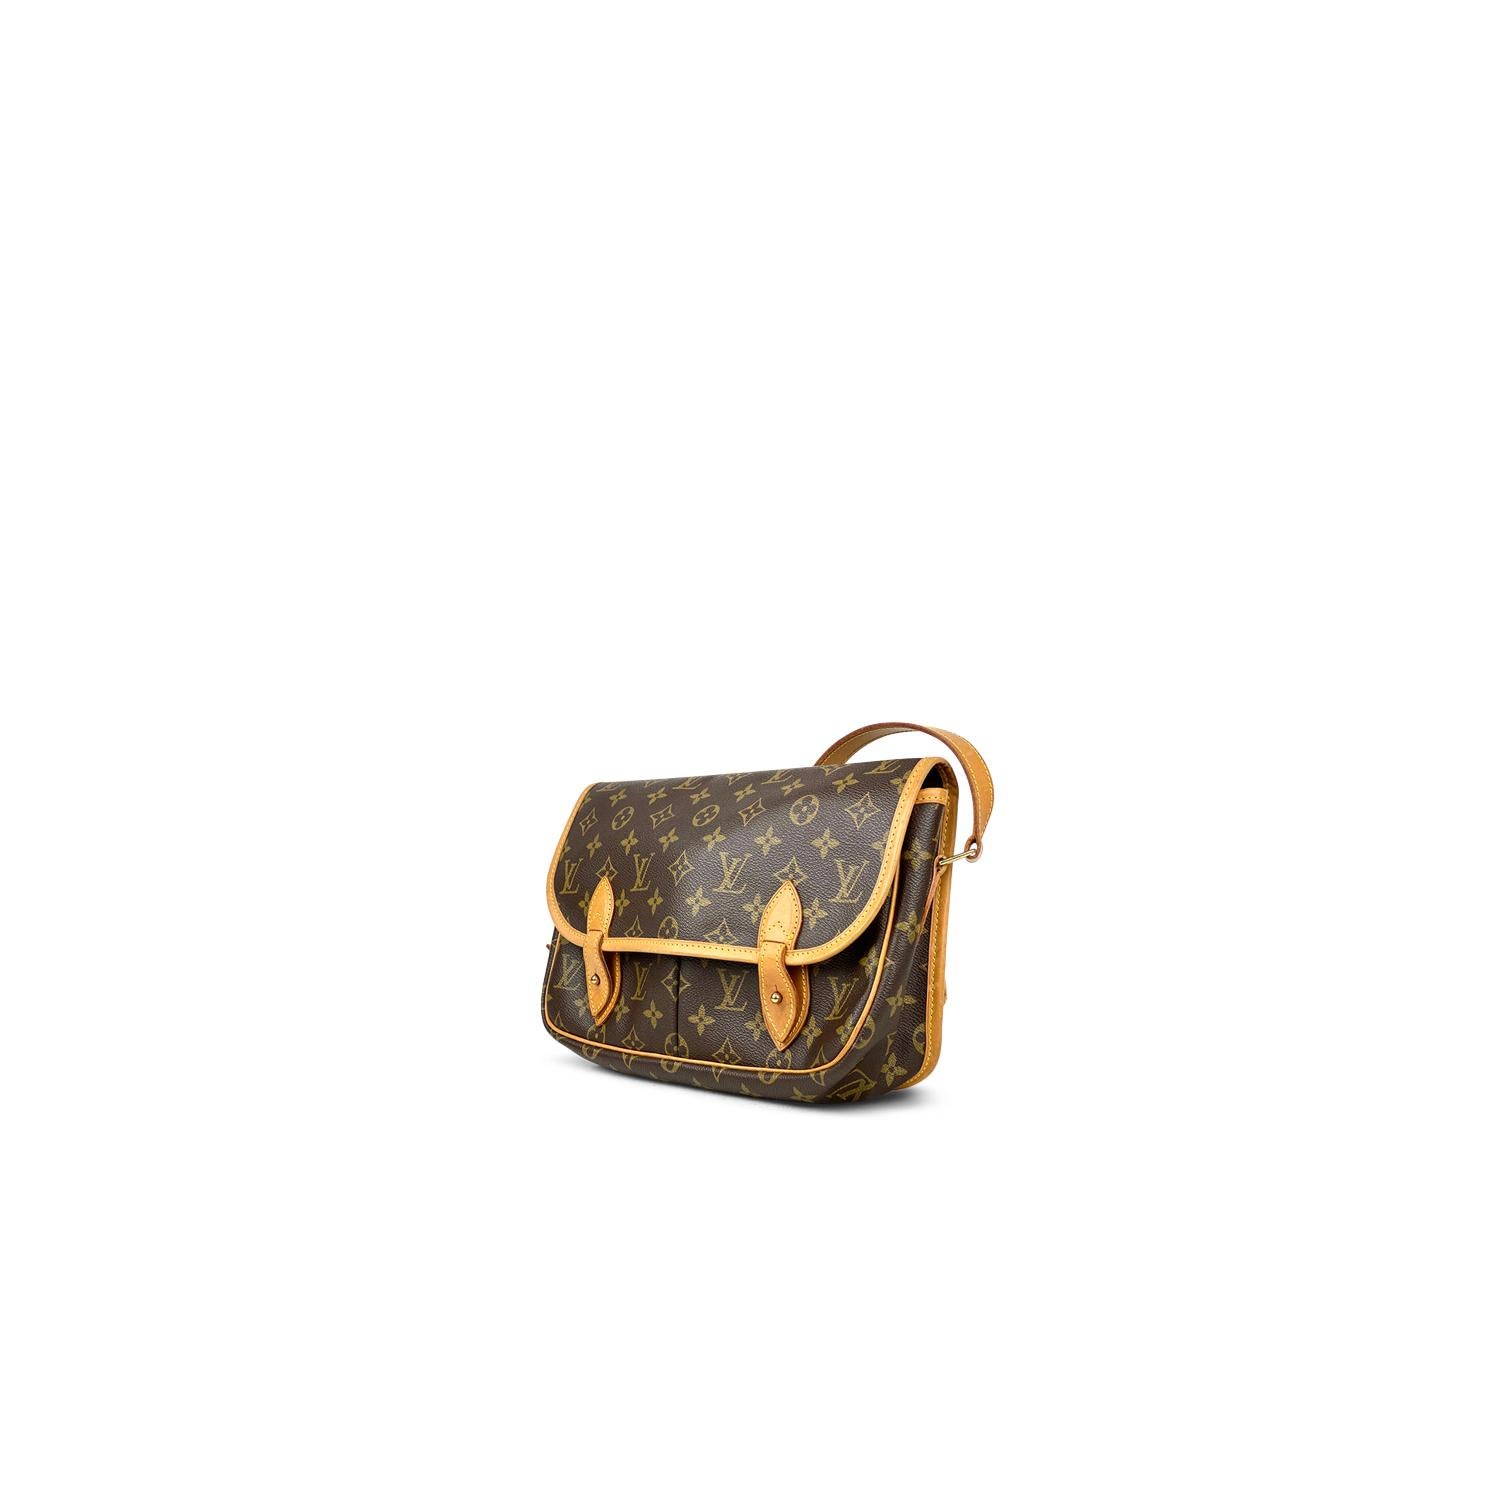 Brown and tan monogram coated canvas Louis Vuitton Sac Gibeciere MM with

- Brass hardware
- Tan Vachetta leather trim
- Single flat shoulder strap with buckle adjustment
- Single slit pocket at exterior back
- Dual slip pockets at flap underside,